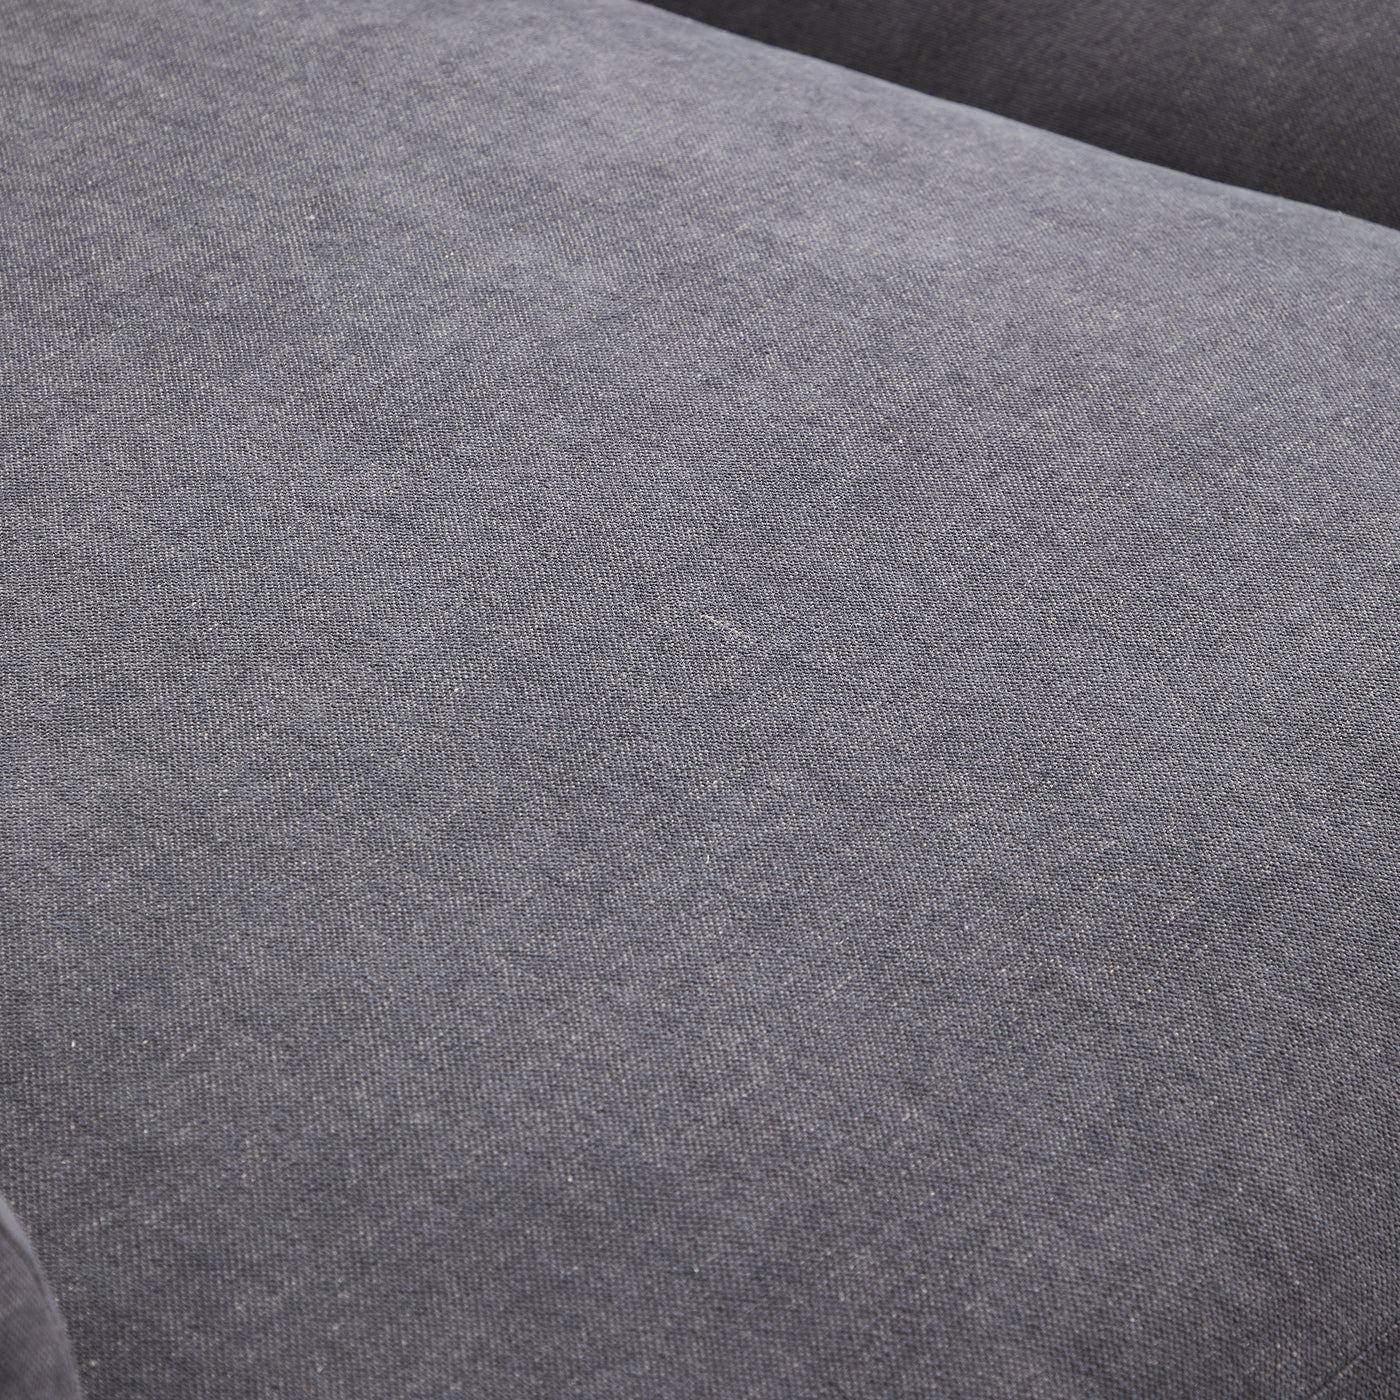 Isabelle Vintage Gray Fabric Sofa-Gray